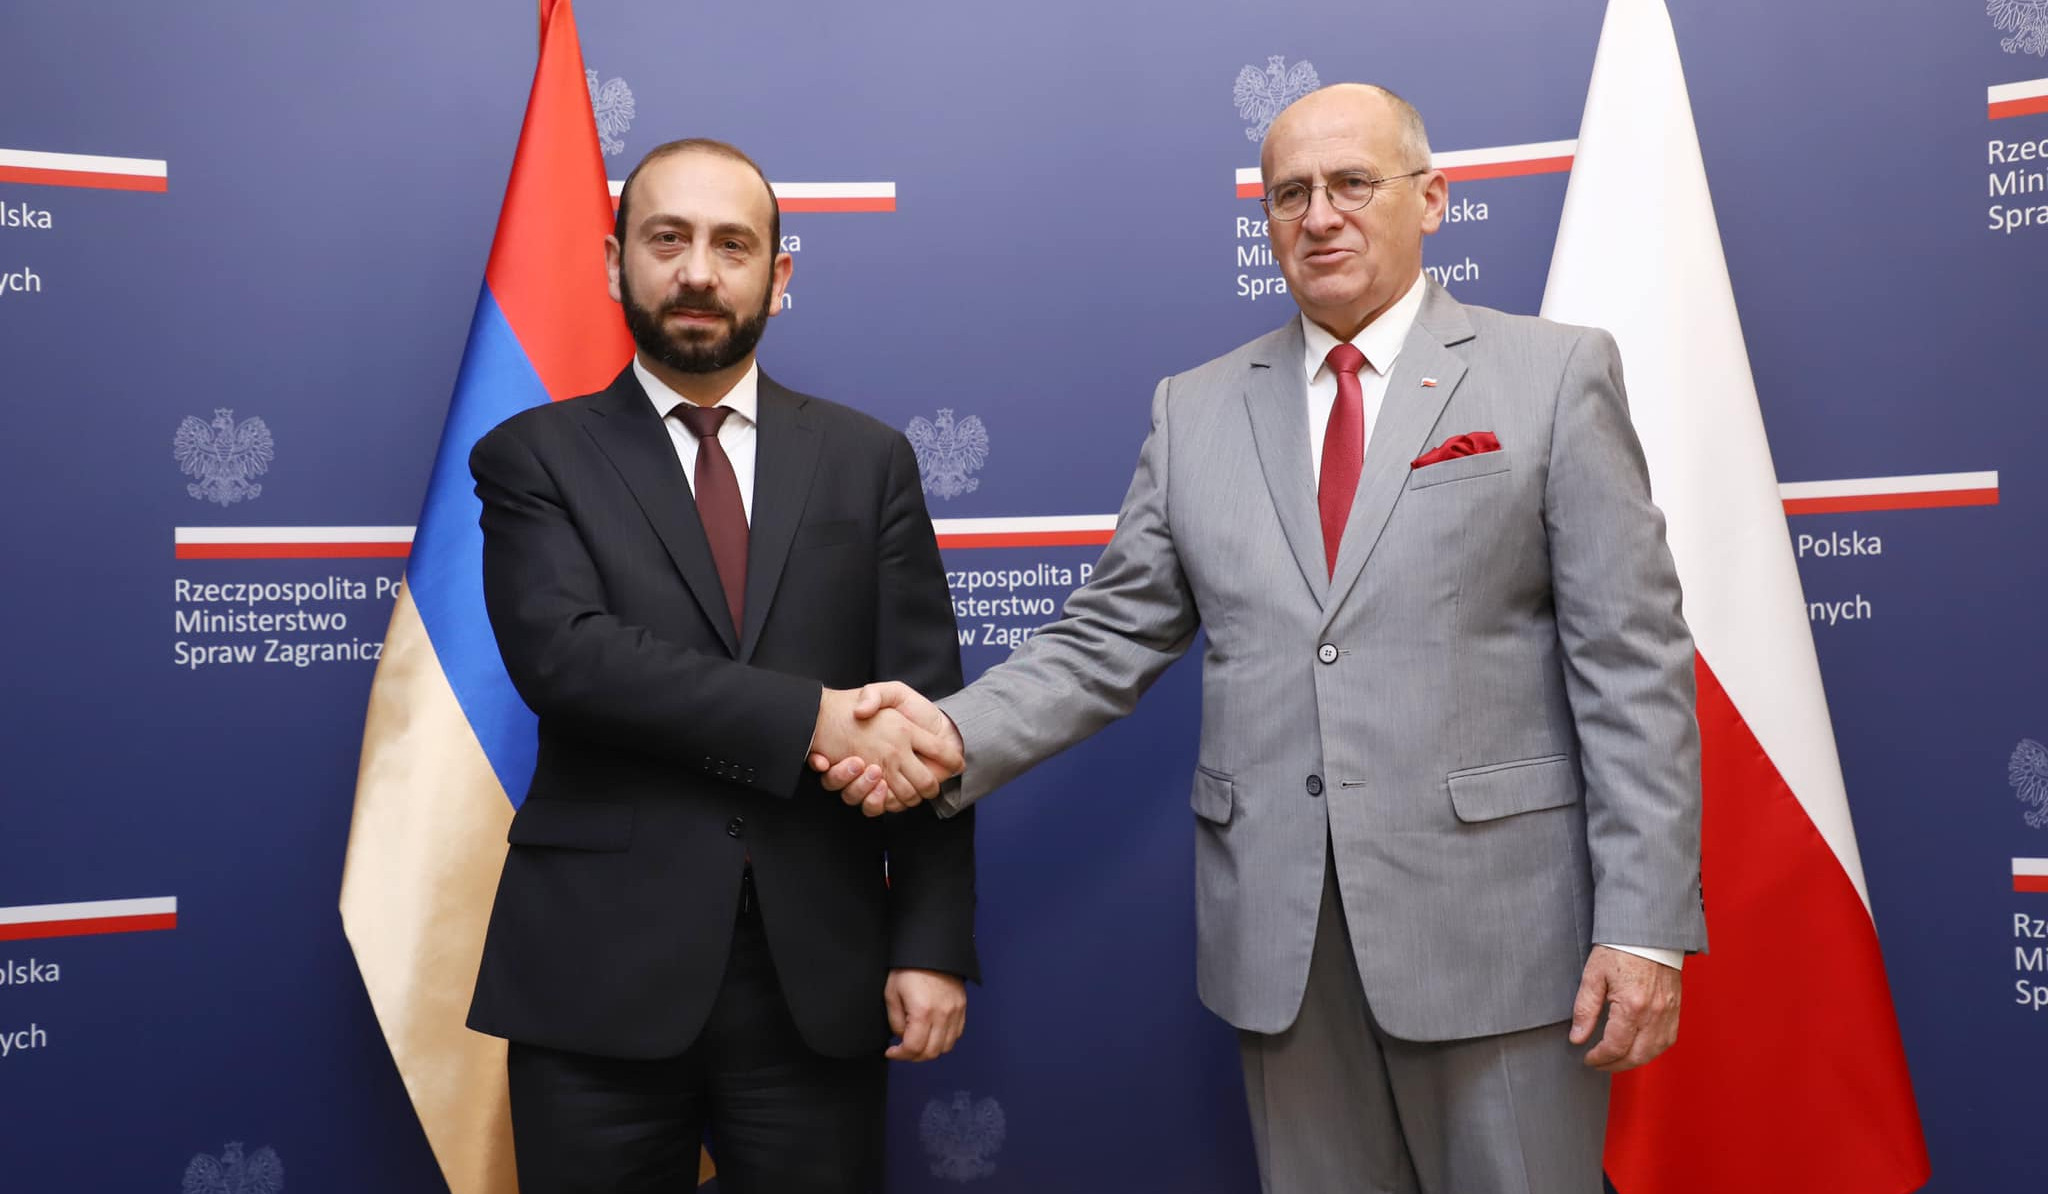 Ararat Mirzoyan's official visit to Poland kicked off